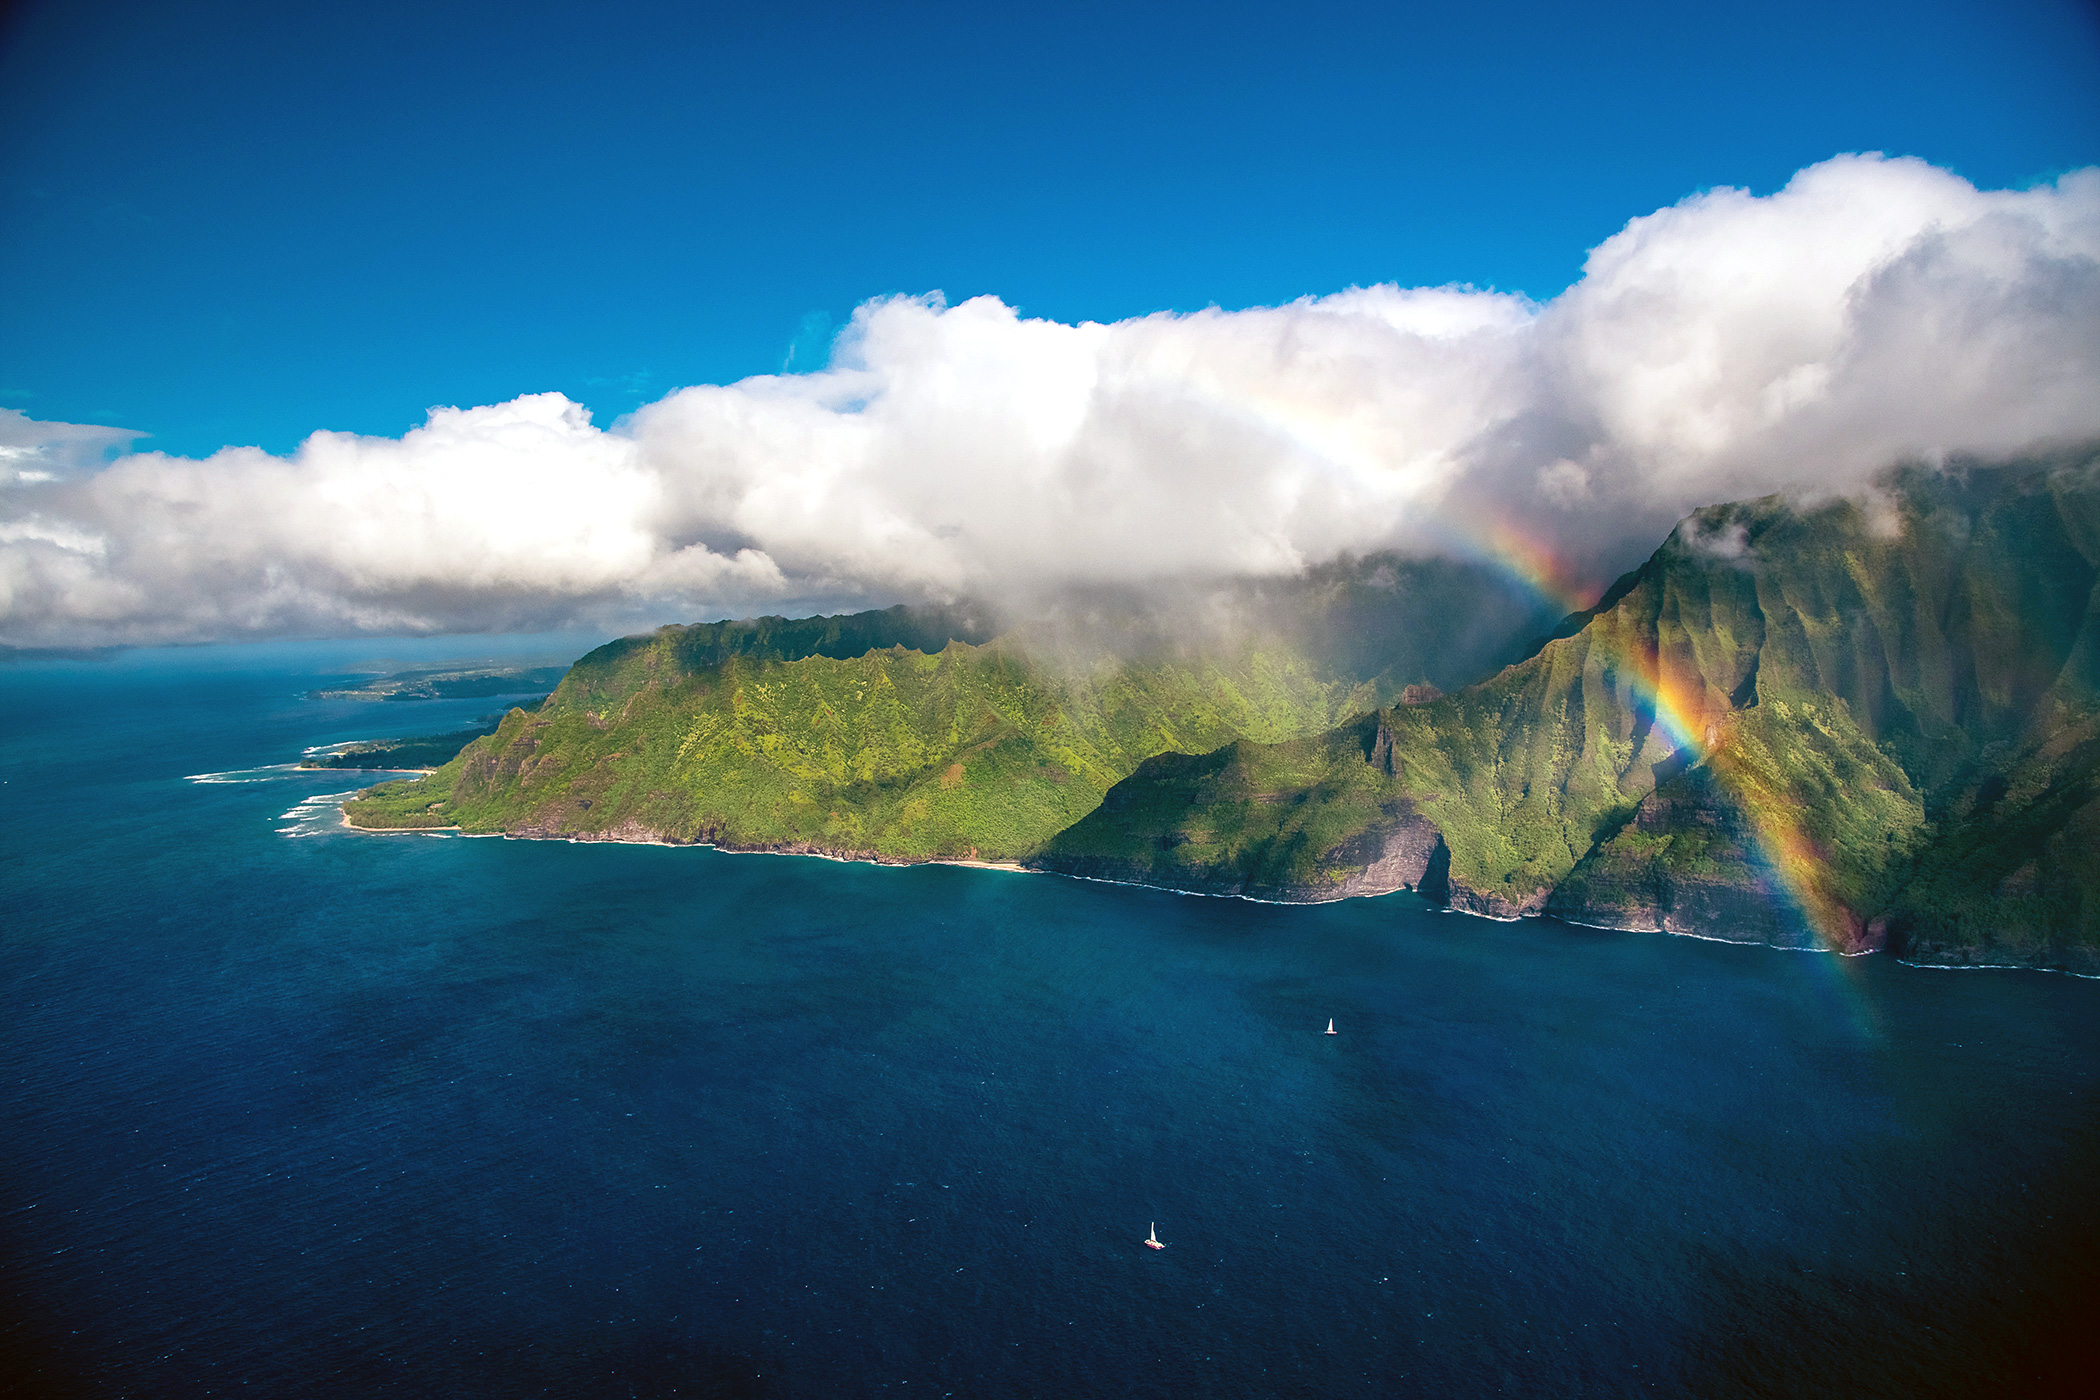 Rainbow Helicopter Views above Sailboats in Hawaii